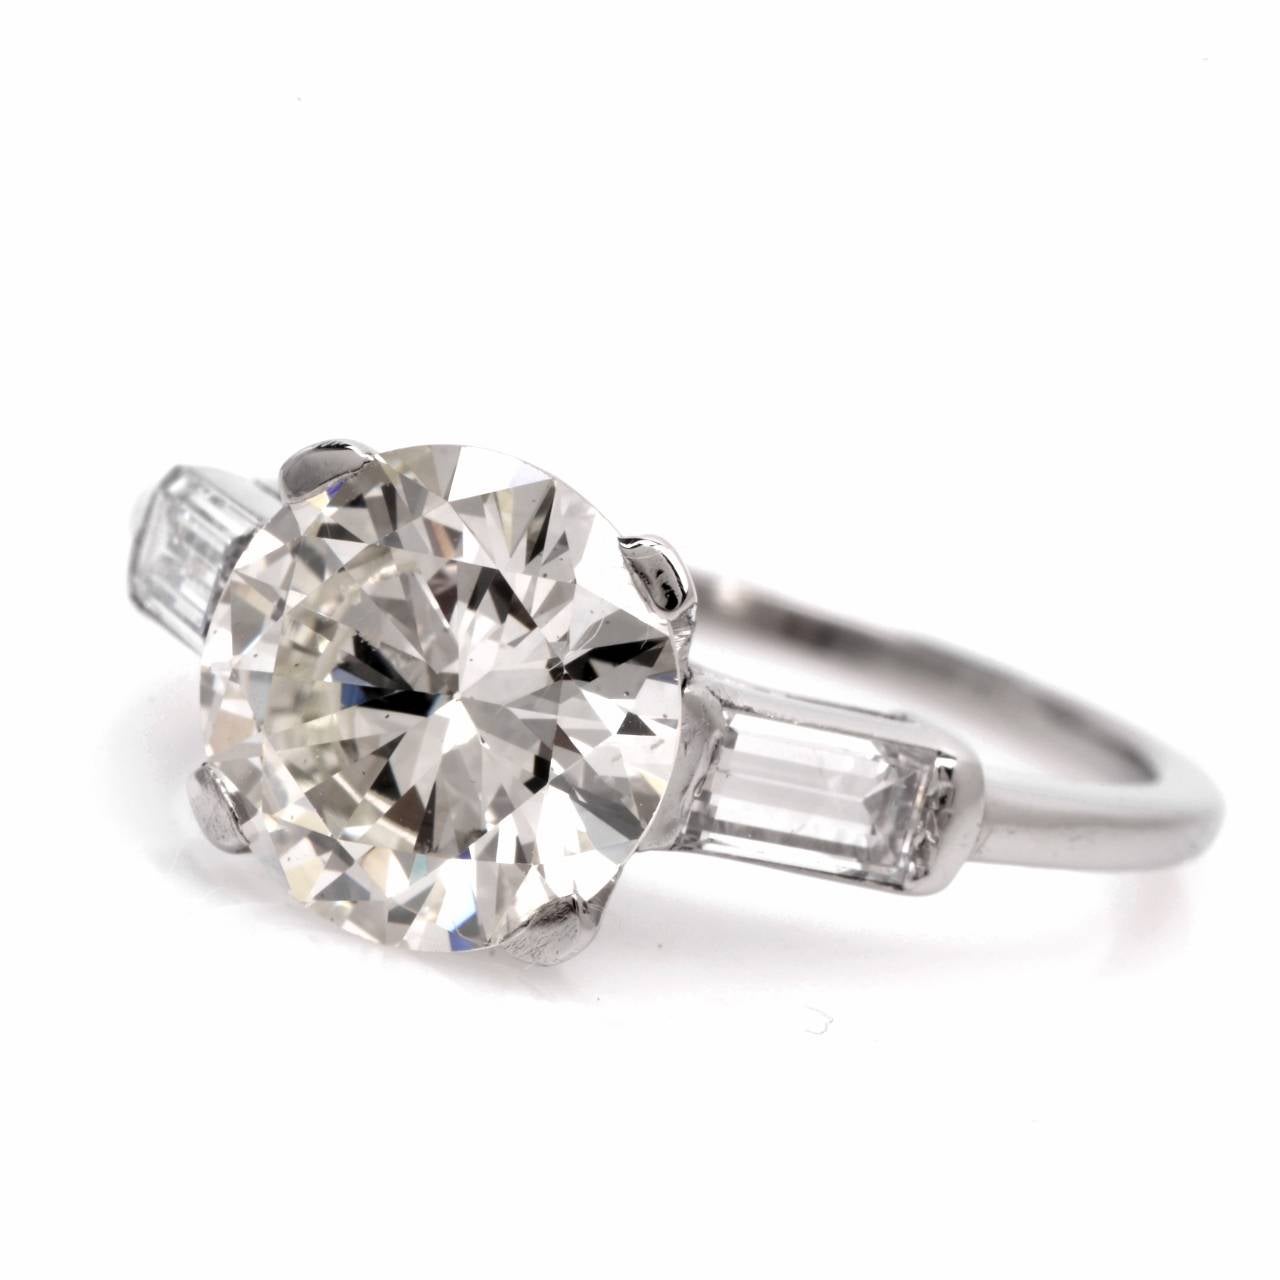 This  classically distinct  estate  engagement ring  is crafted in solid platinum and weighs 4.00 grams. Designed with  simplicity yet timeless elegance and  and  feminine grace, this  diamond engagement ring exposes at the center a genuine, round